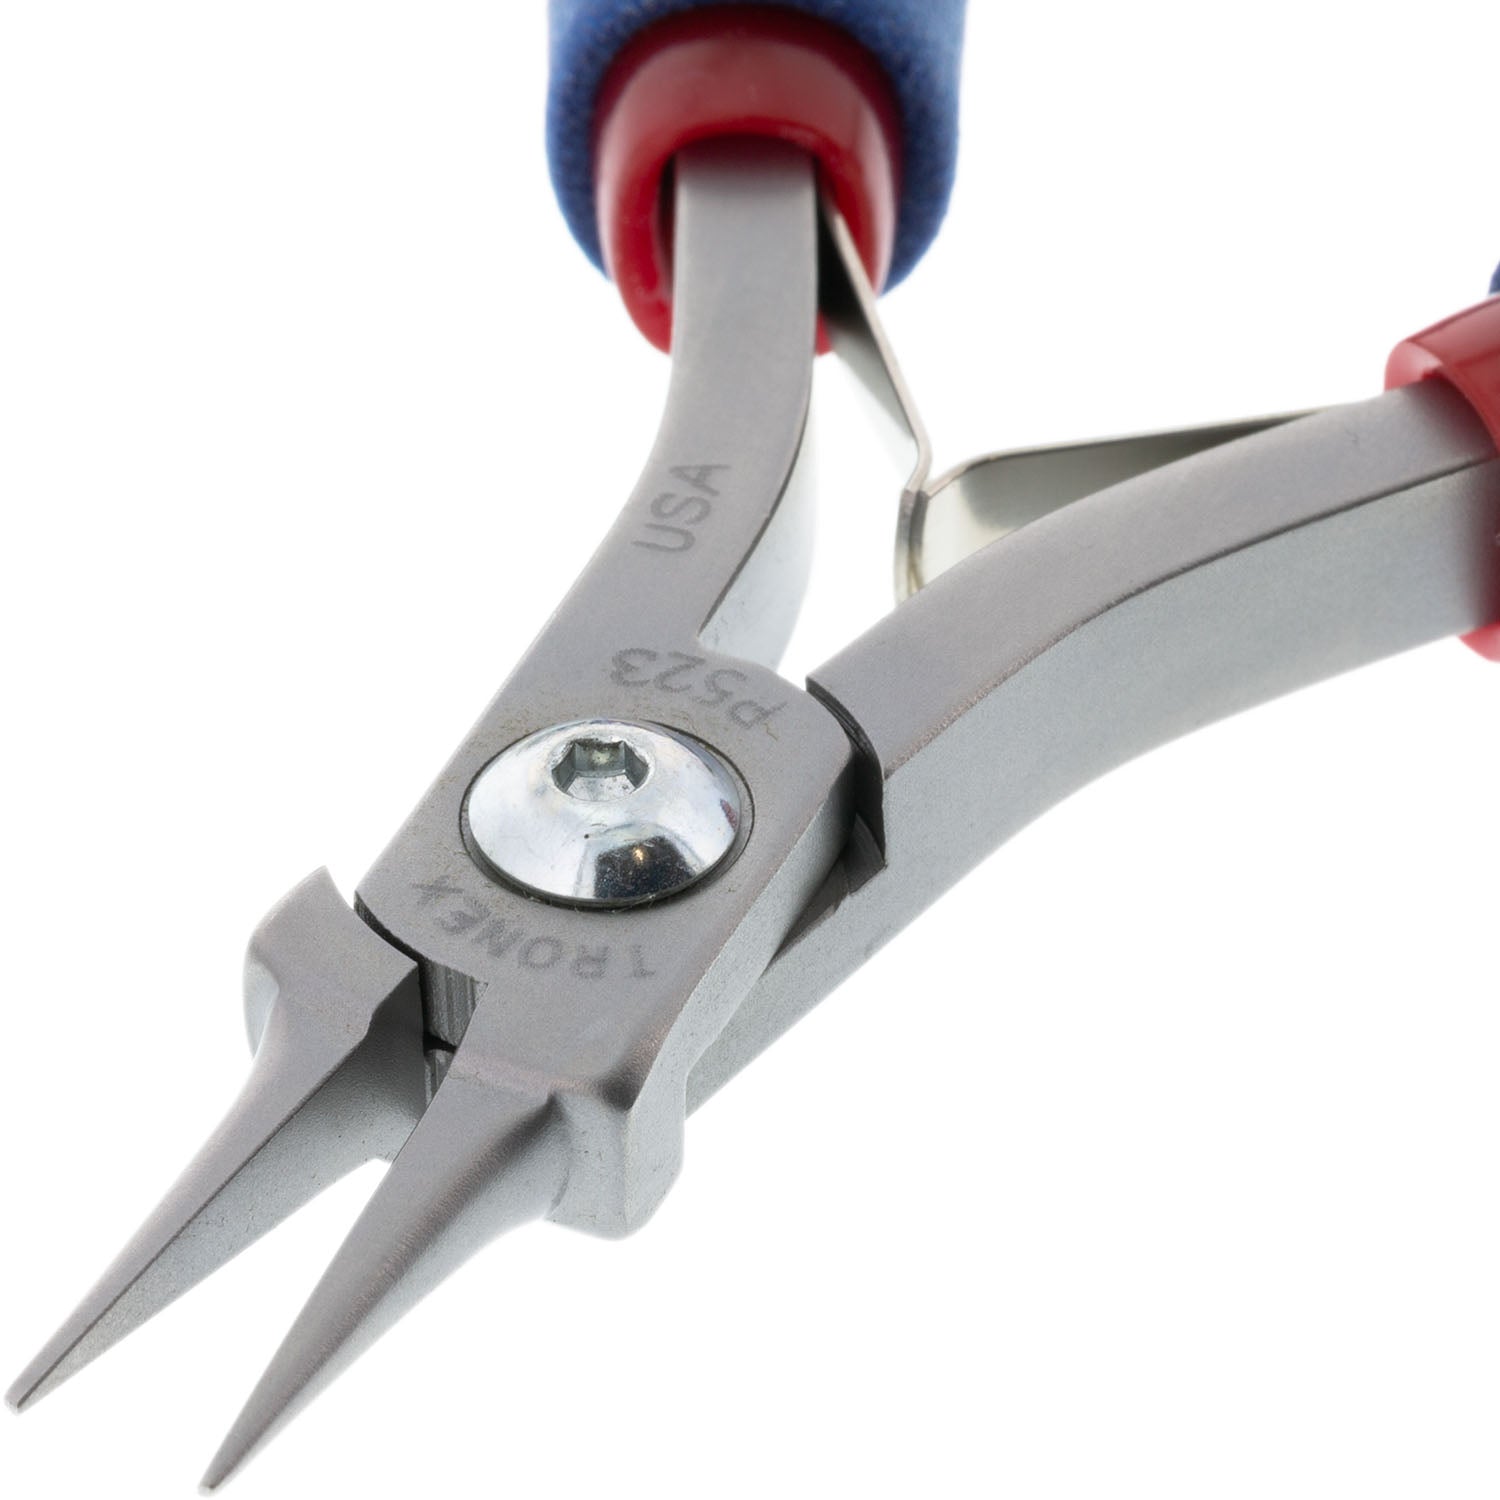 Tronex - P524 Needle Nose Pliers Extra Long Smooth Jaw